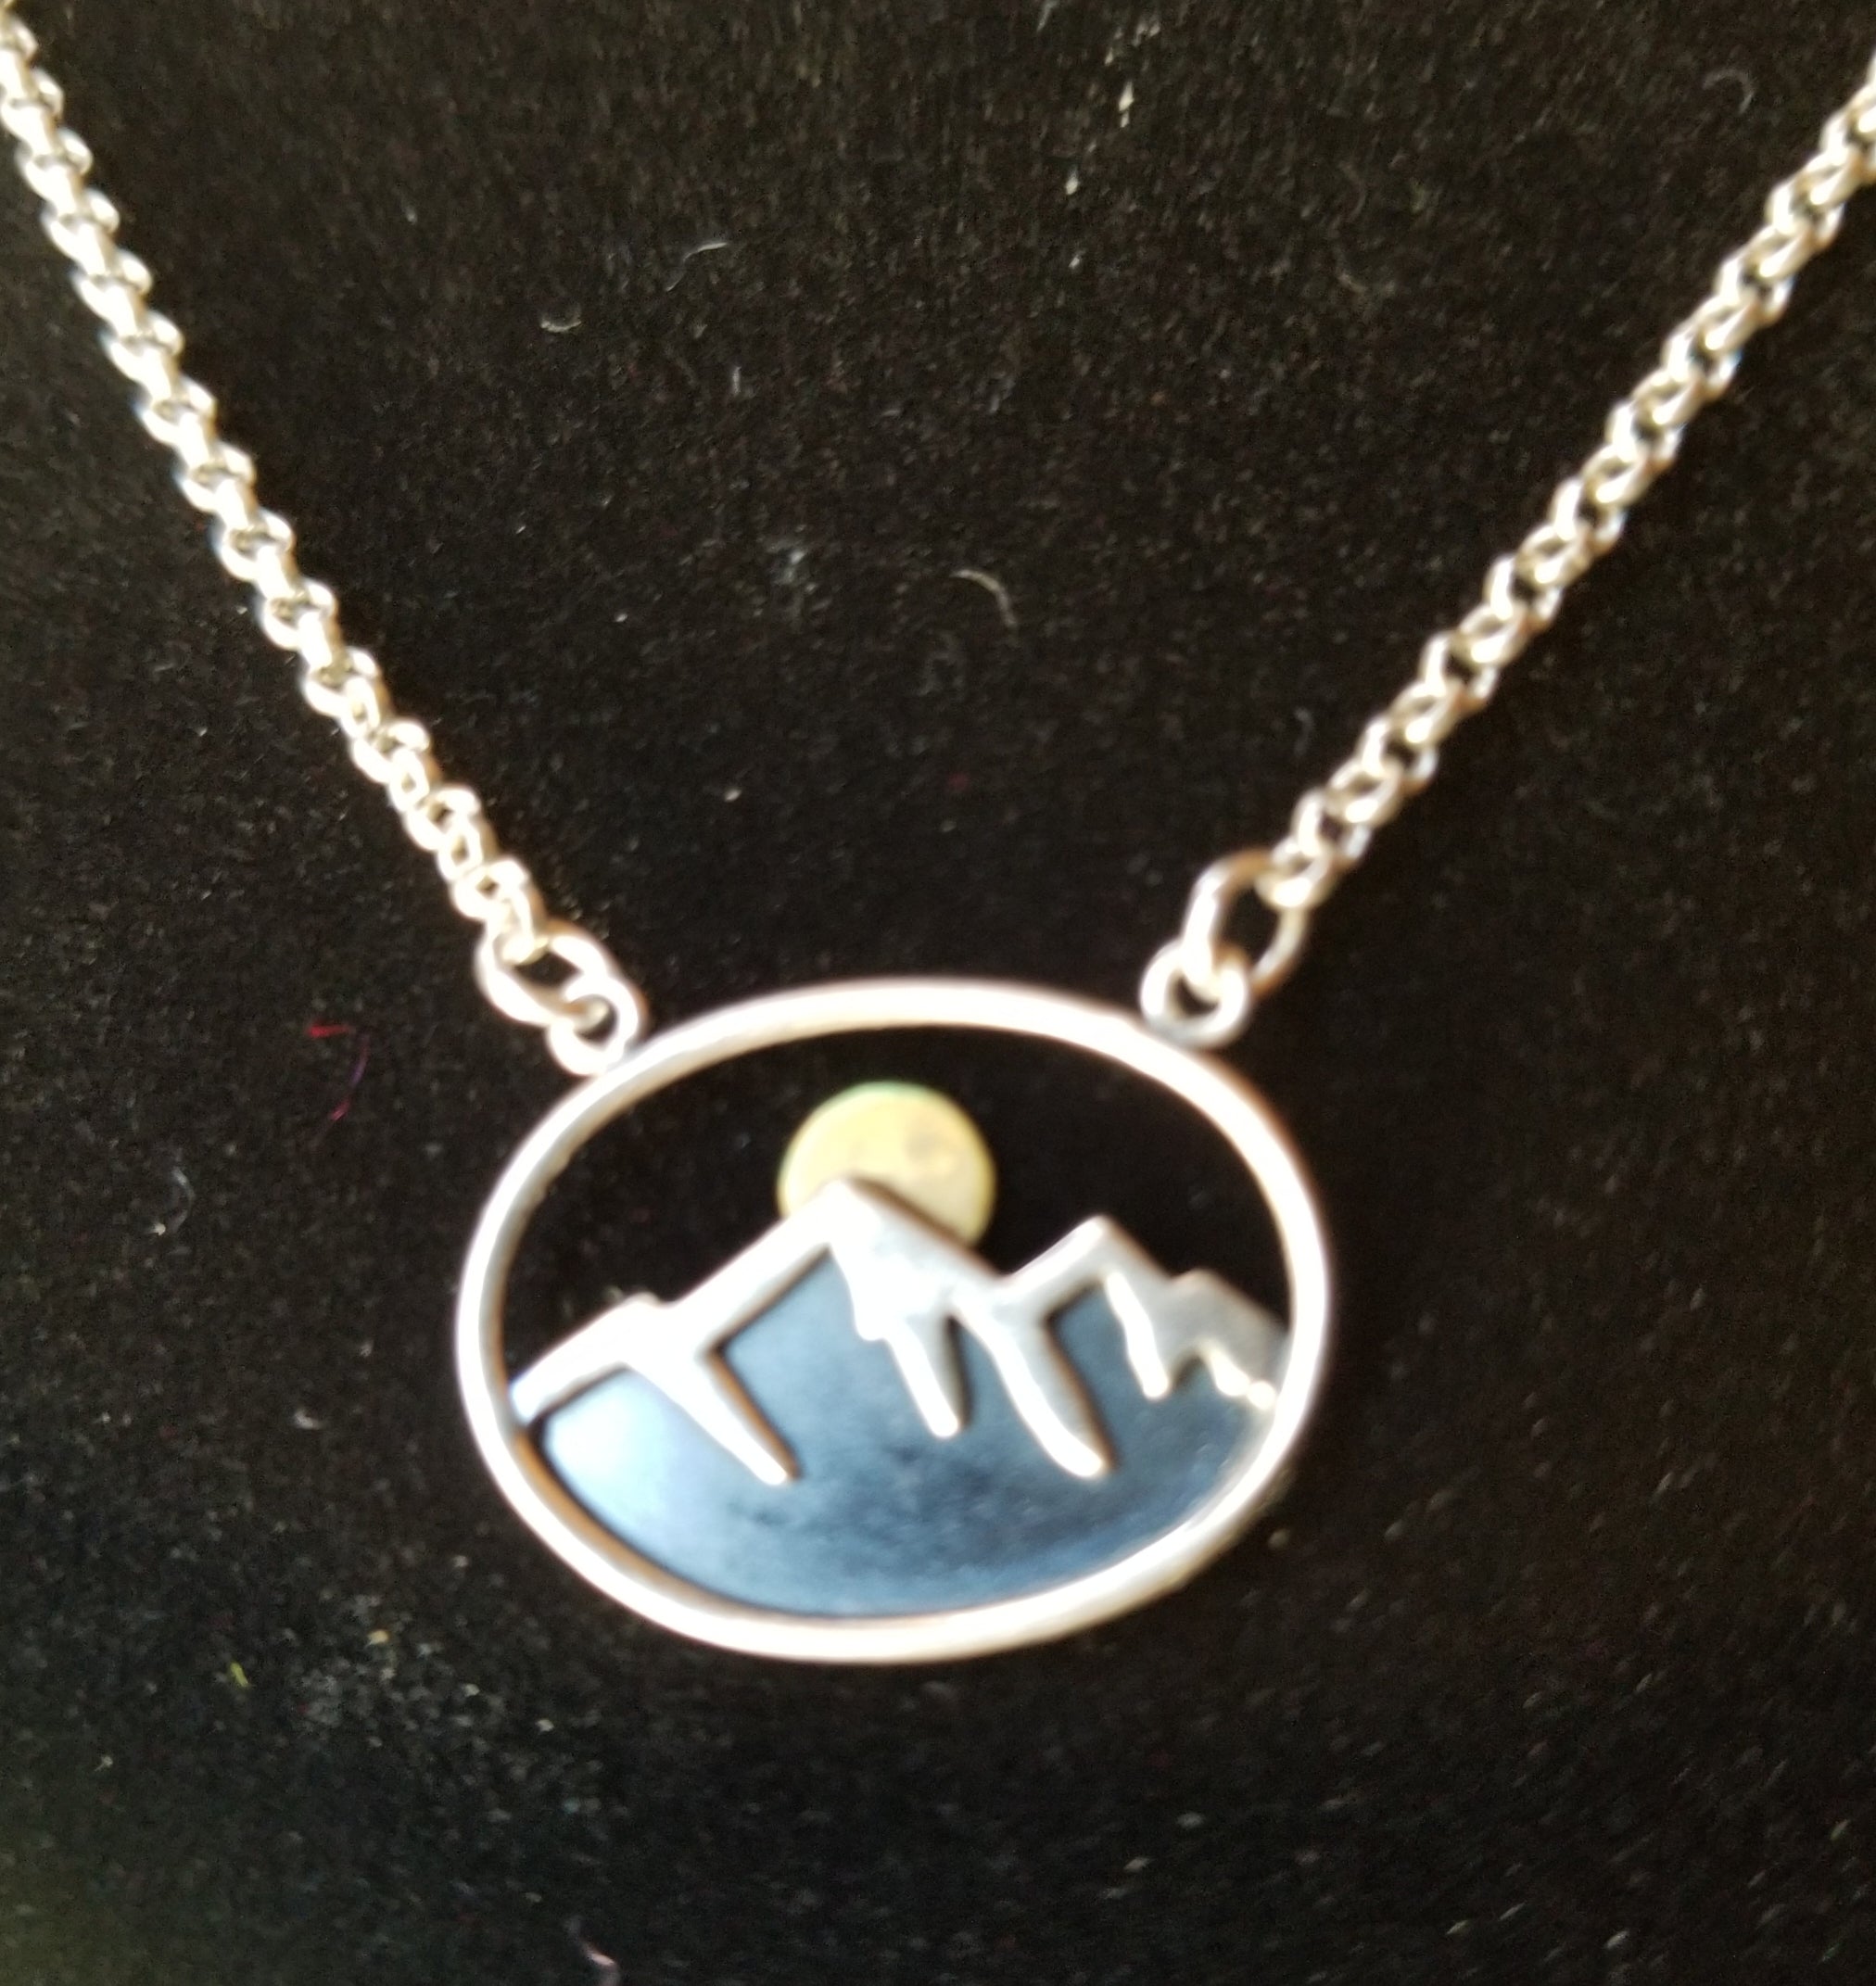 mountain NEW sterling silver bronze moon sun choker necklace hiker climber birthday holiday gift choice of length Free shipping and gift box